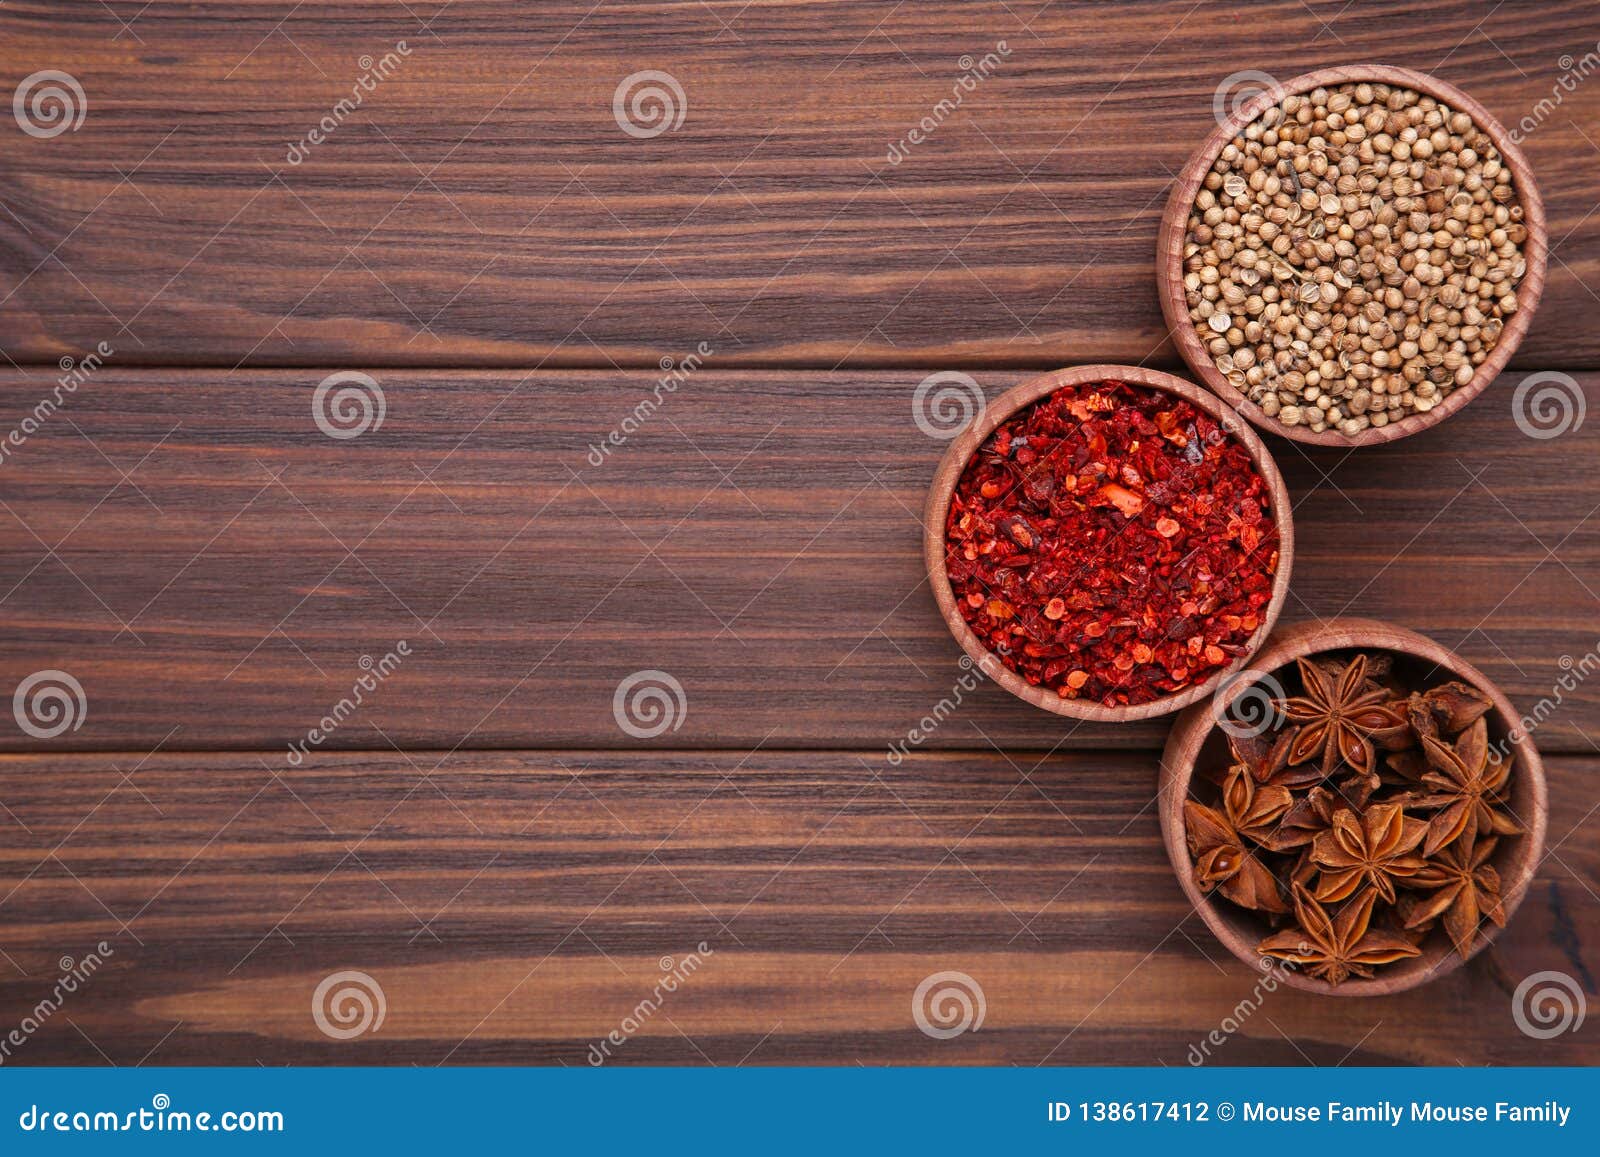 Spices Mix on a Brown Wooden Background. Top View Stock Photo - Image ...